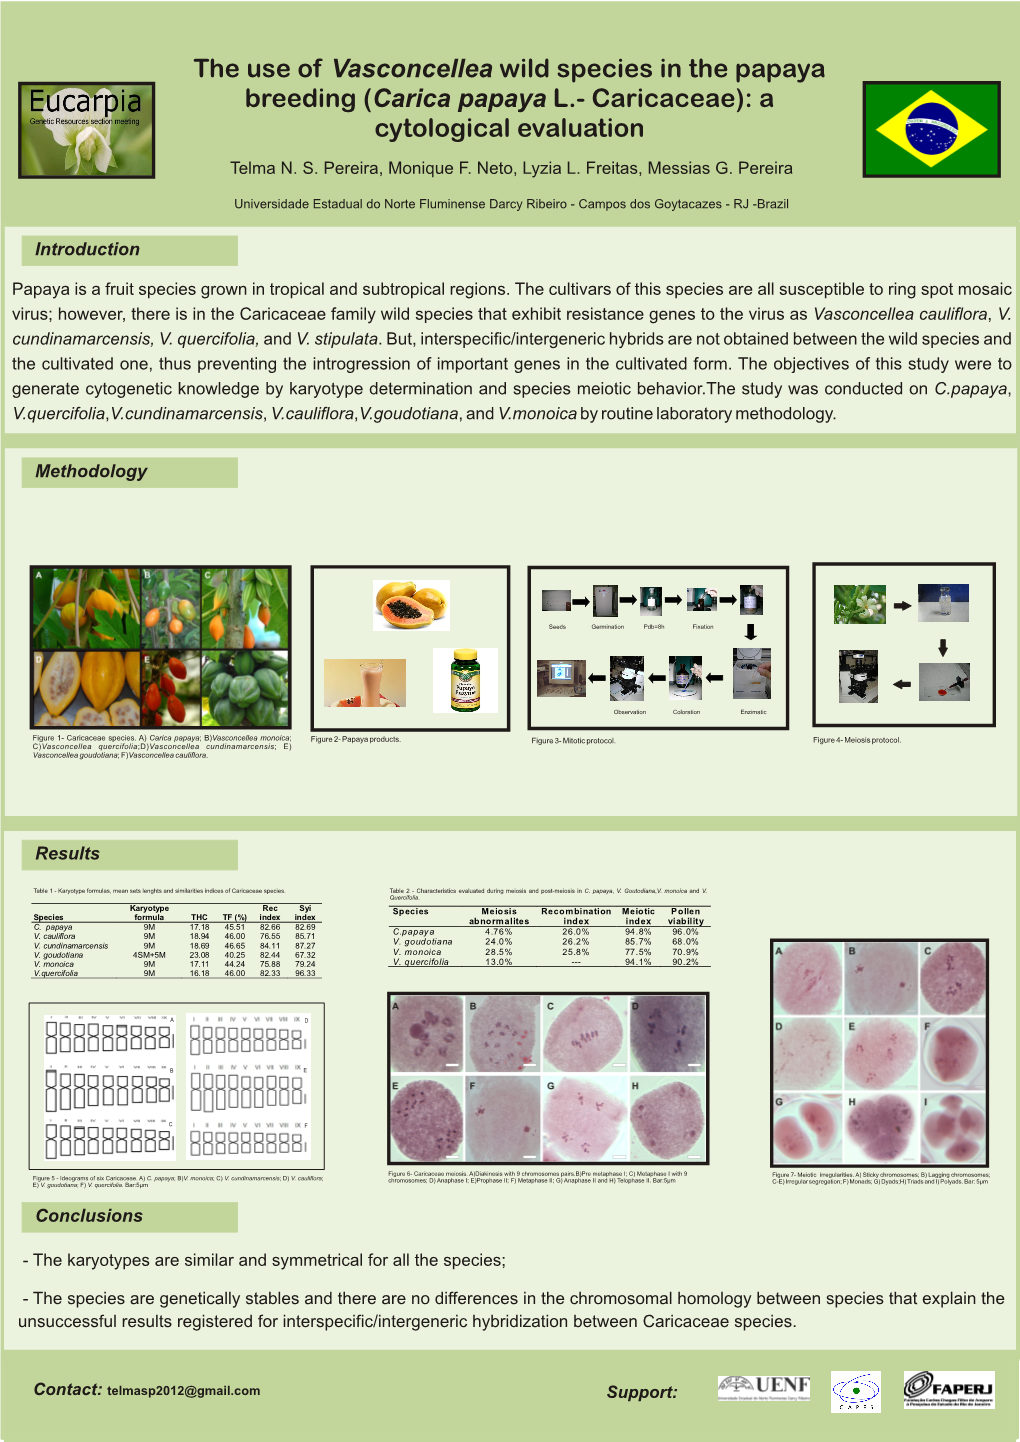 The Use of Vasconcellea Wild Species in the Papaya Breeding (Carica Papaya L.- Caricaceae): a Cytological Evaluation